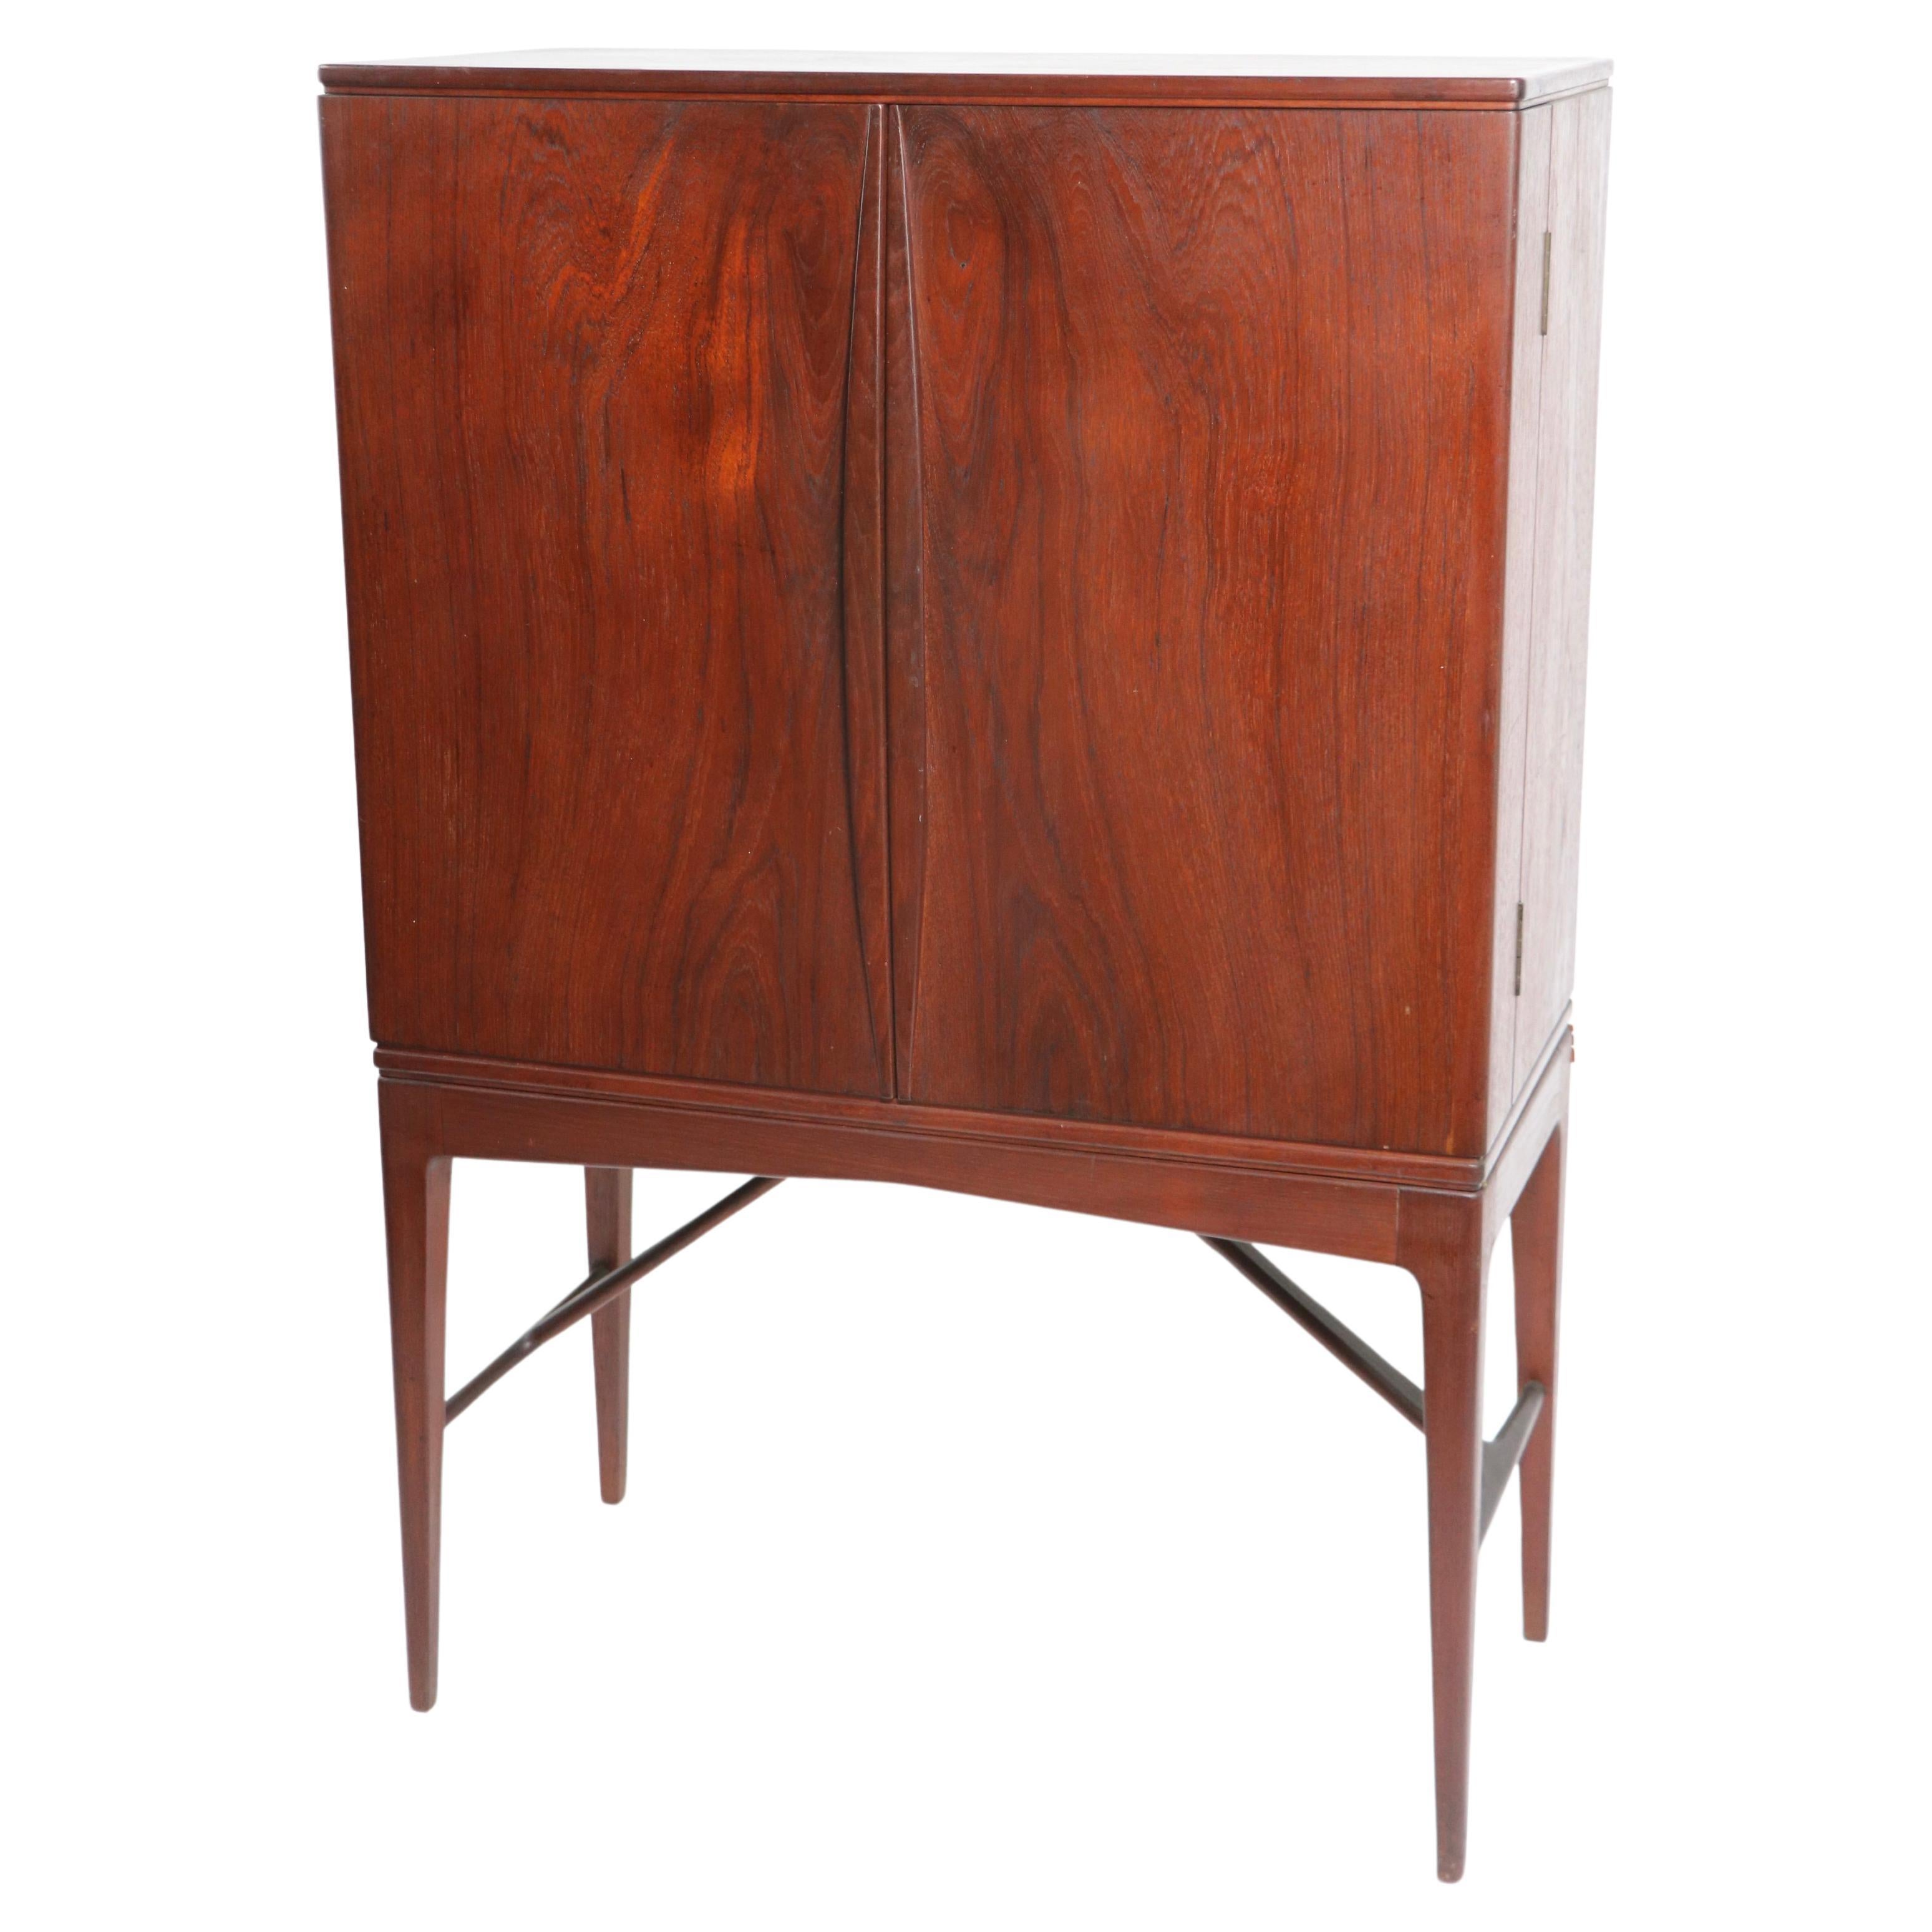 Exquisite Danish Mid Century Modern dry bar cabinet in very fine, original condition. The bar cabinet features two doors, which open to reveal two glass shelves, the doors each have two trays for bottles etc. Top quality design, and construction.